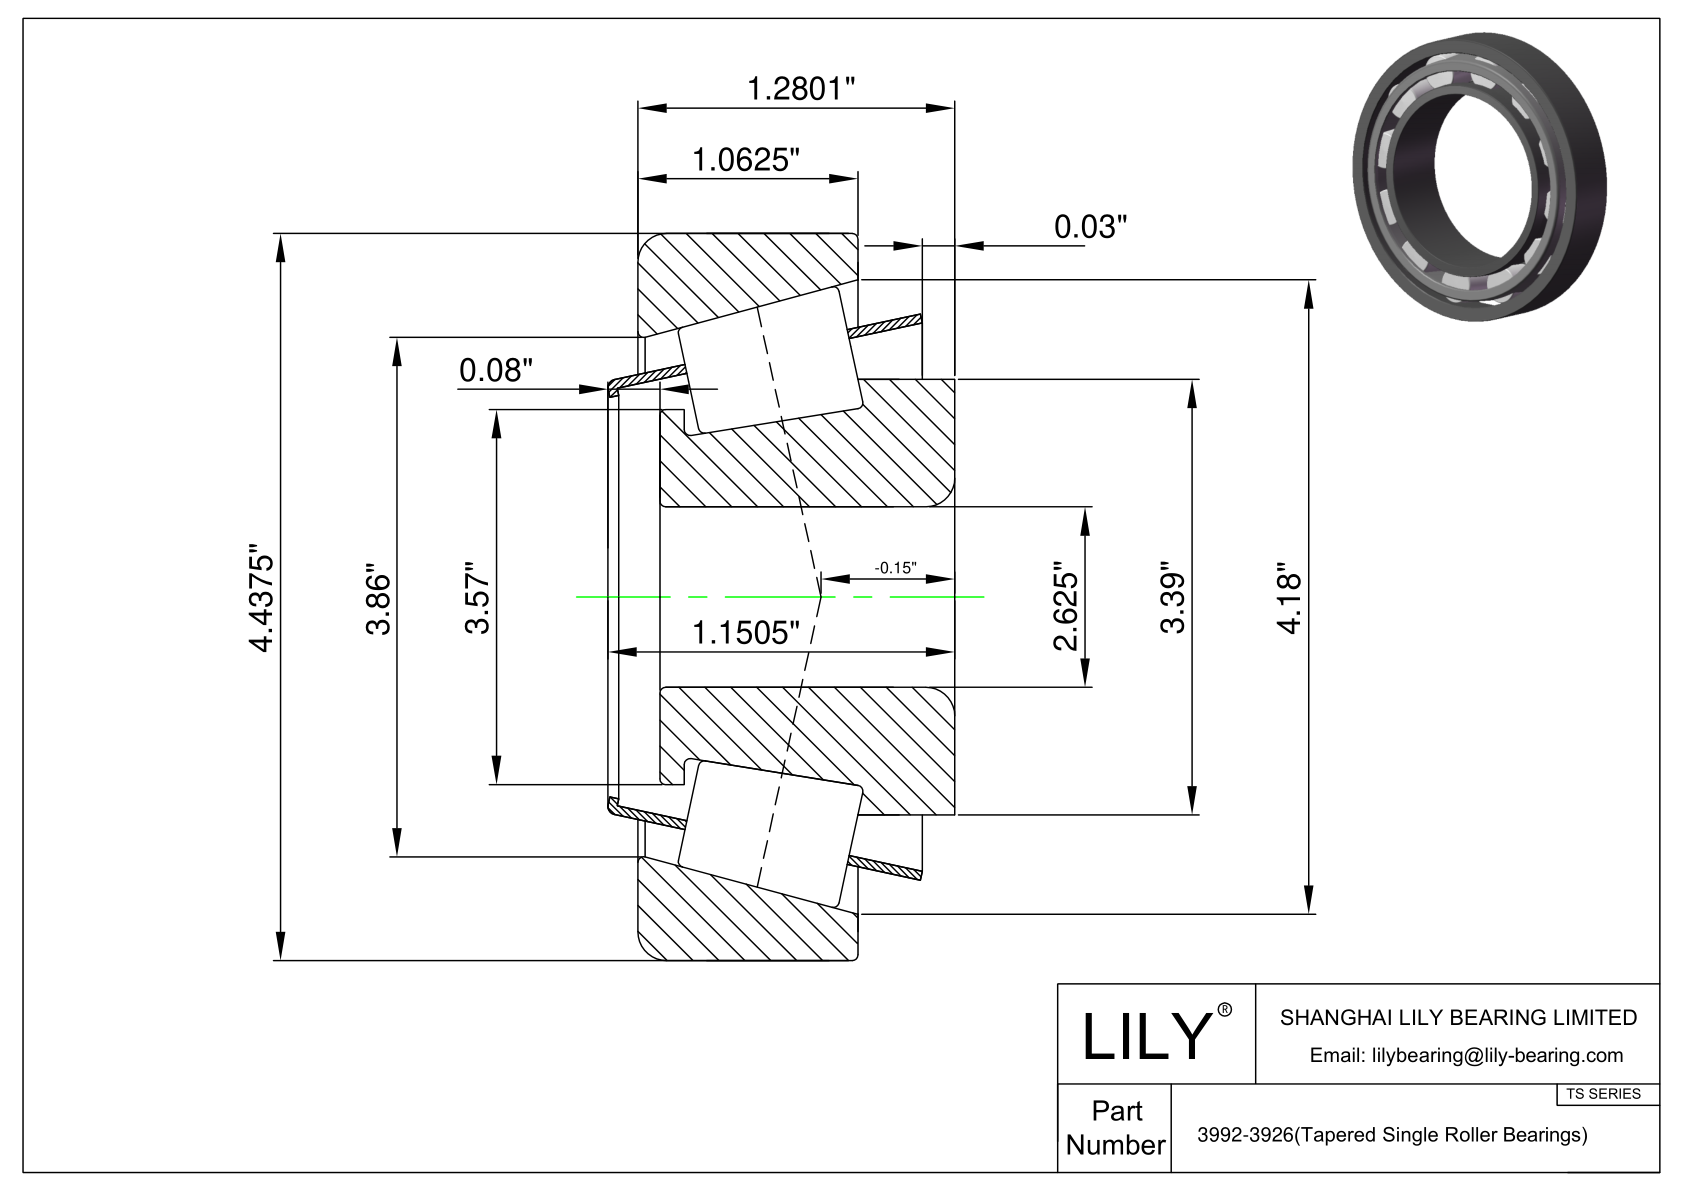 3992-3926 TS (Tapered Single Roller Bearings) (Imperial) cad drawing